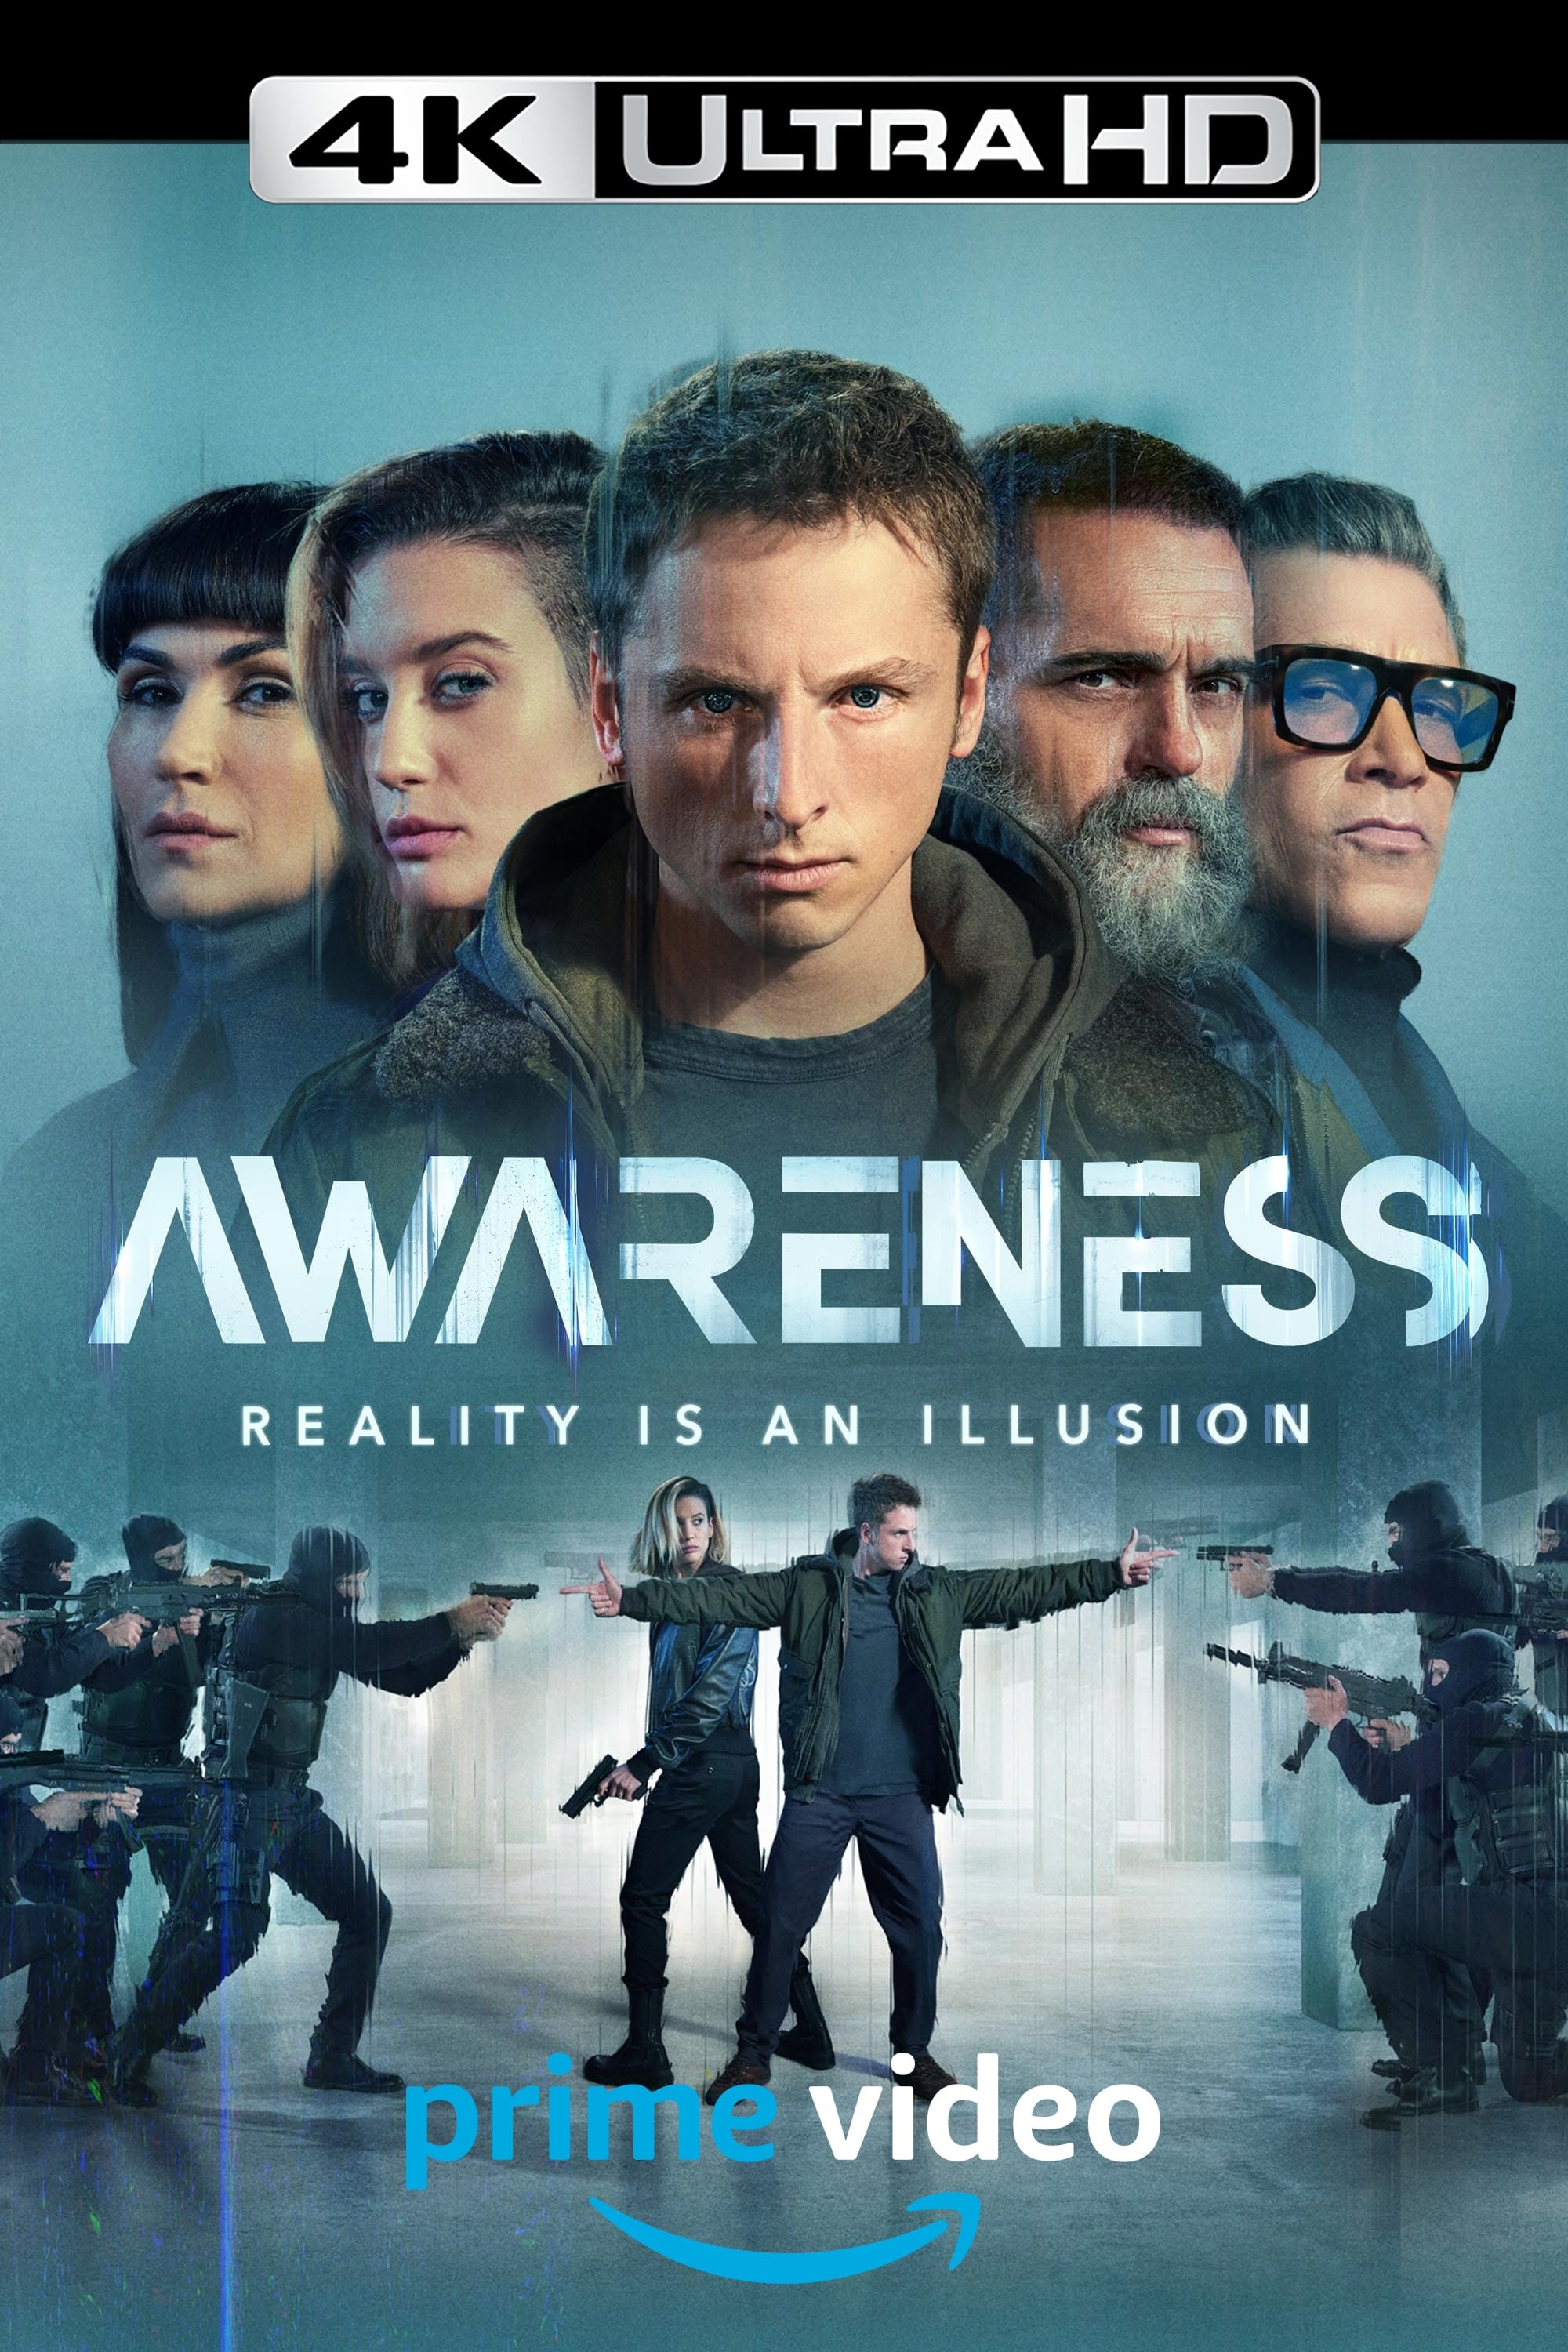 Ian is a teenager who lives with his father on the outskirts by running small scams using Ian's ability to generate visual illusions upon unsuspecting victims. When one of his cons goes awry, his abilities publicly spiral out of control and Ian becomes the target of two rival organizations, each seeking to exploit his powers.